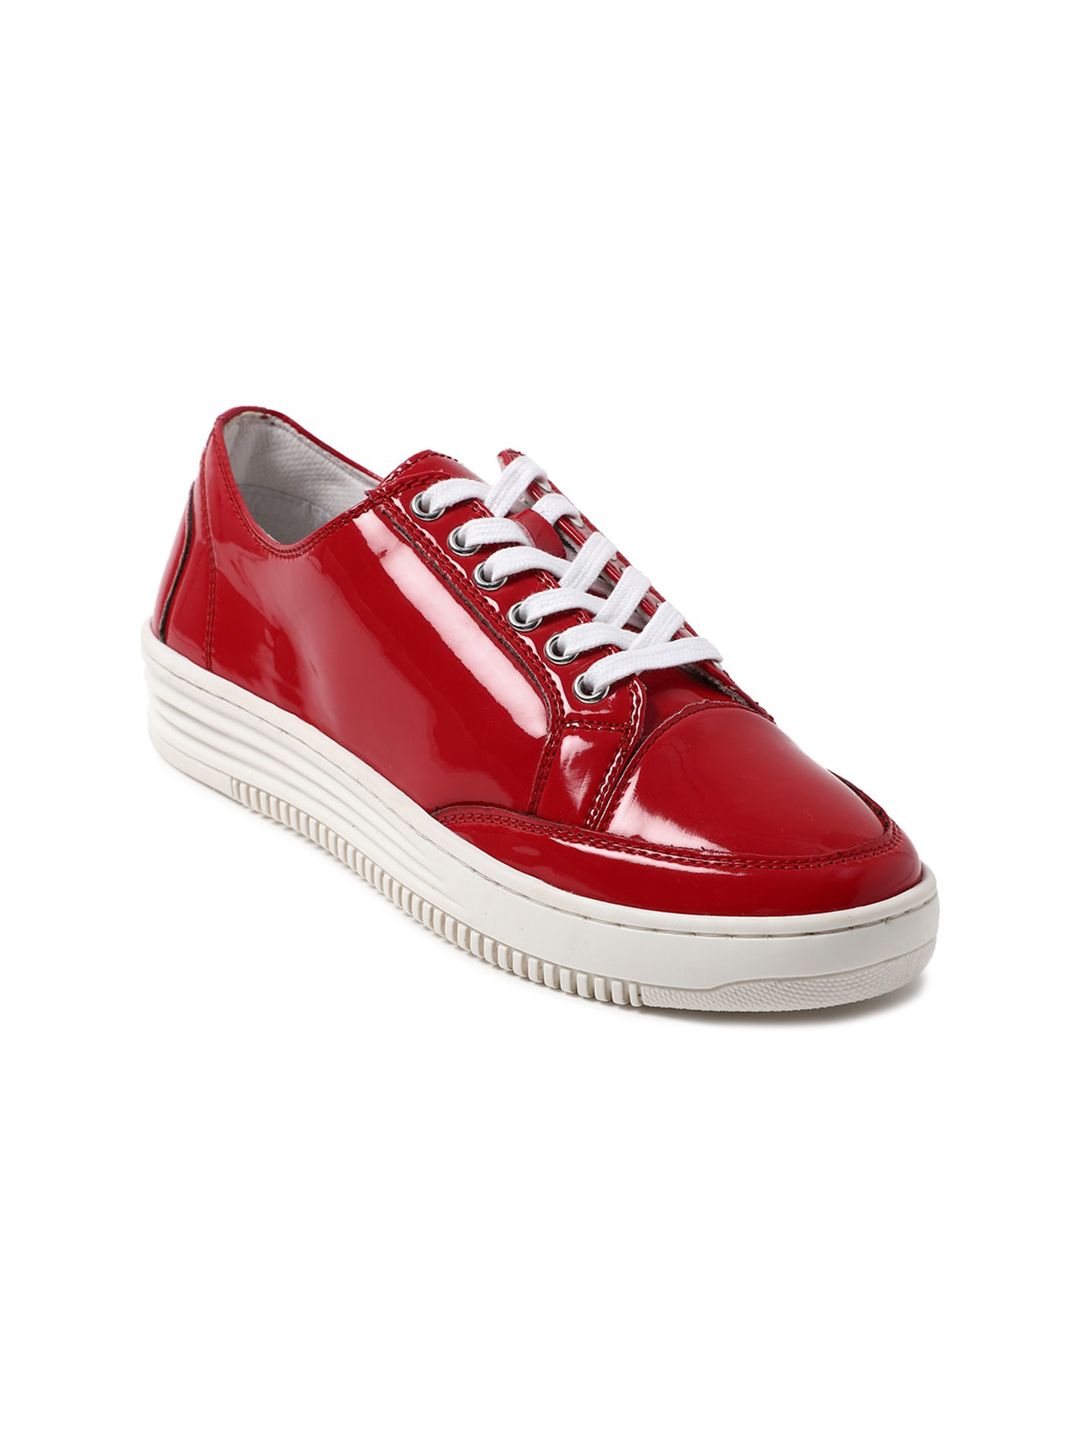 FOREVER 21 Women Red Textured PU Sneakers Price in India